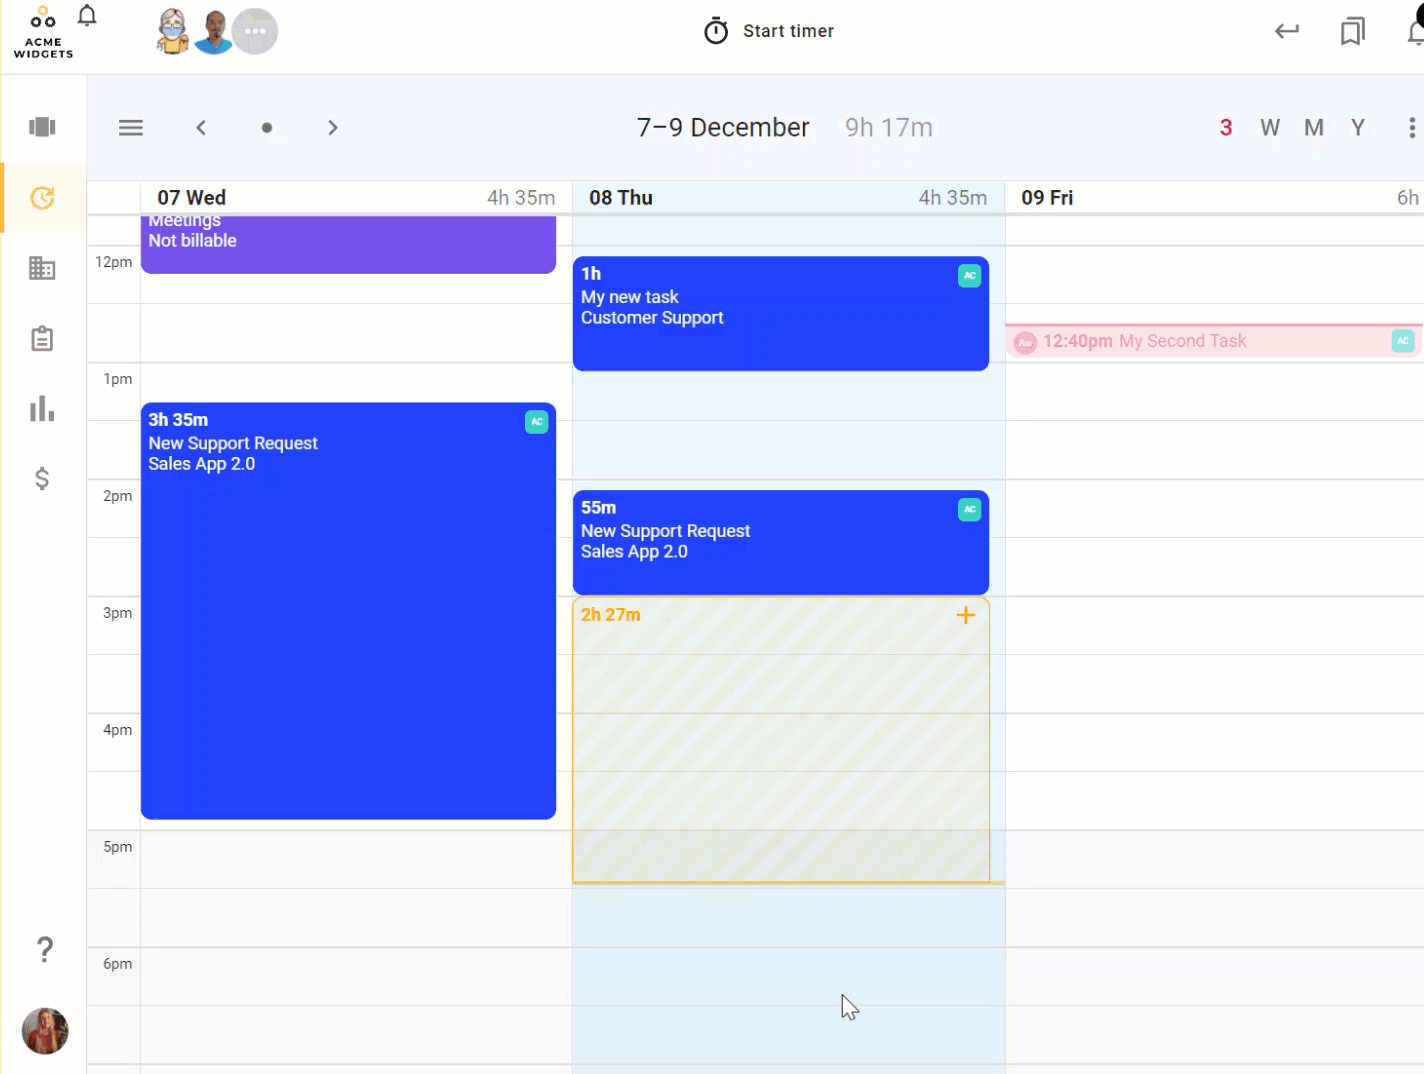 An animated GIF demonstrating how a User can create a time entry in seconds in todo.vu's calendar.